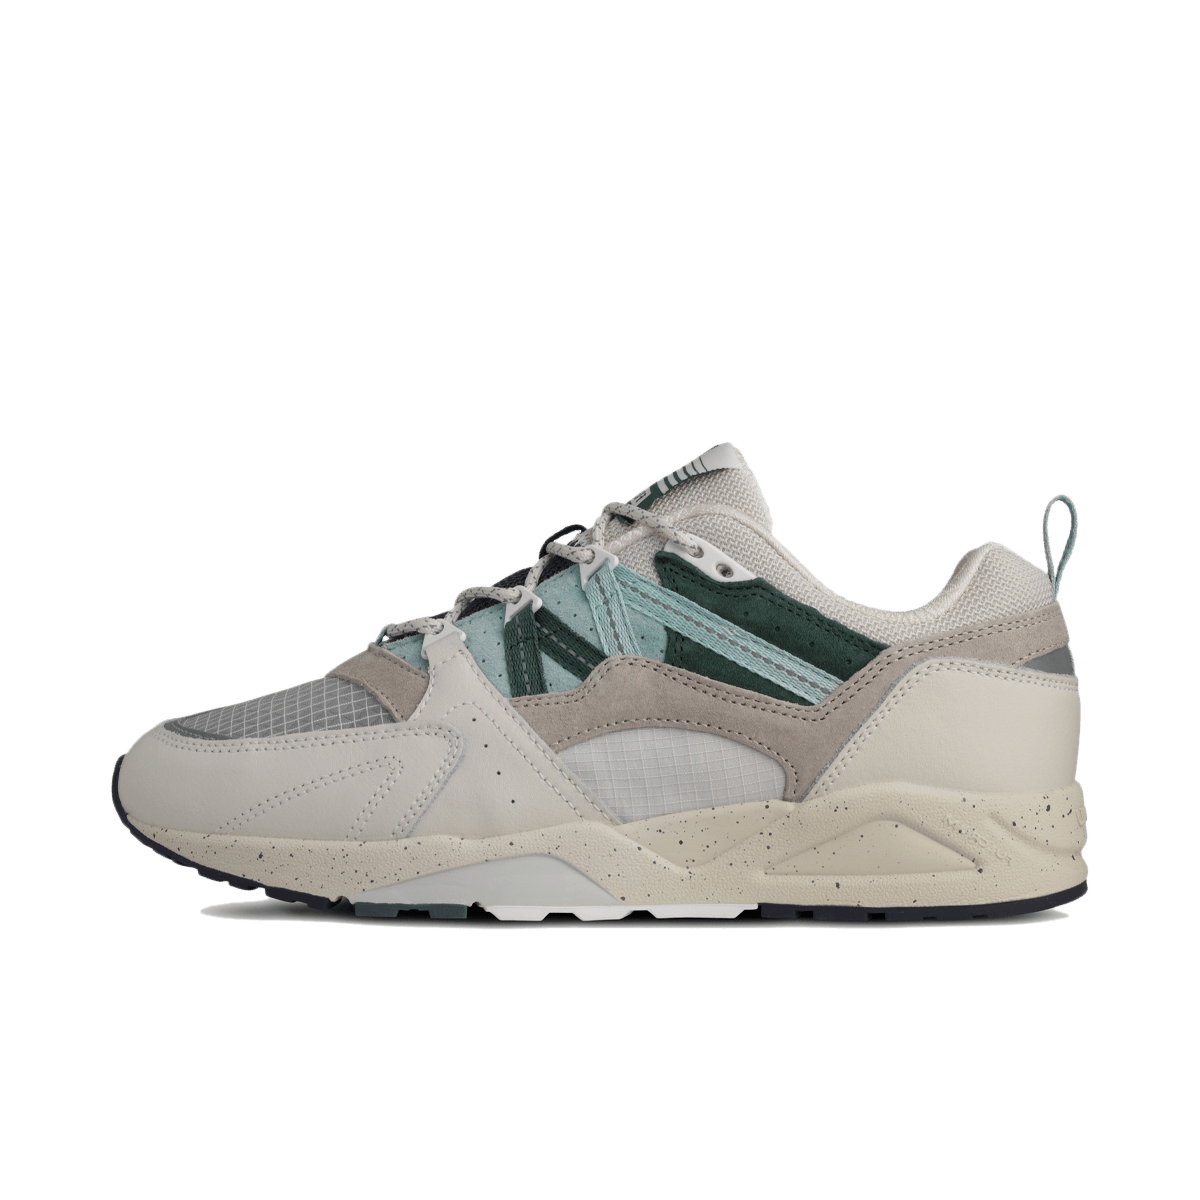 Karhu Fusion 2.0 'Lily White' - Flow State Pack F804167